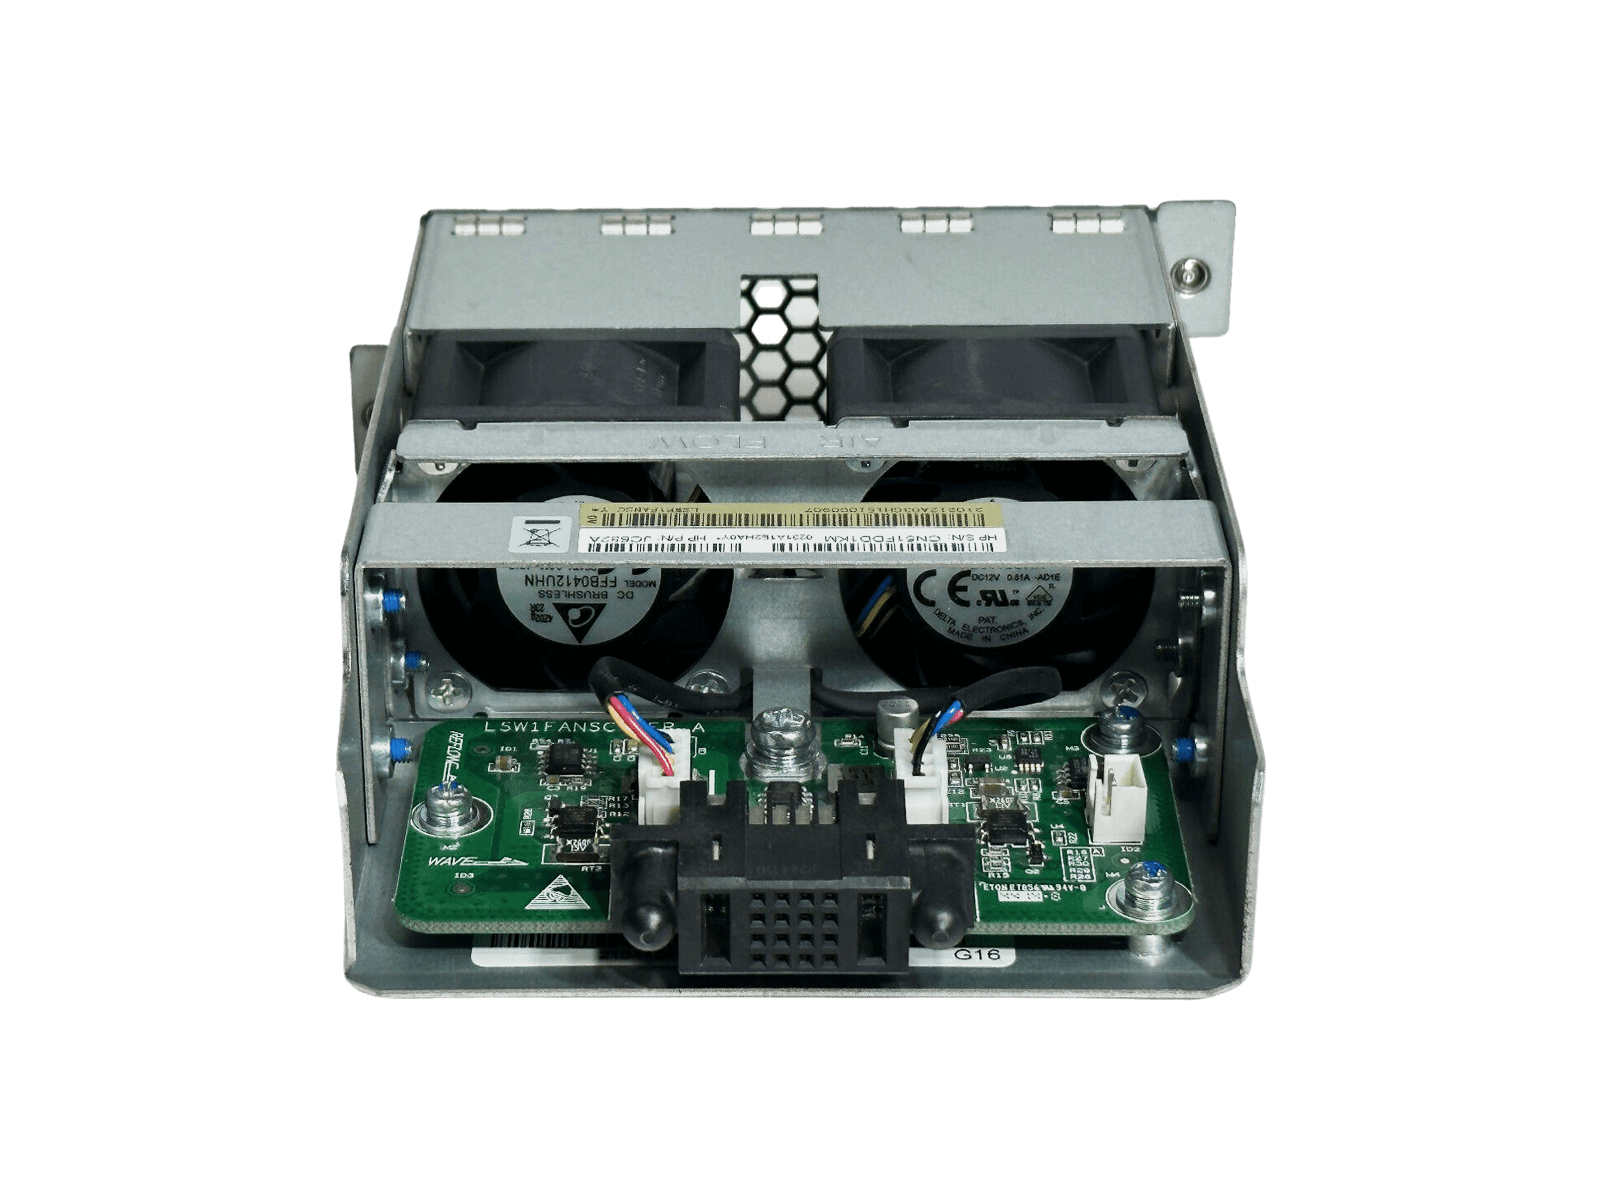 HPE JC682A 58x0AF Back (Power Side) to Front (Port Side) Airflow Fan Tray.